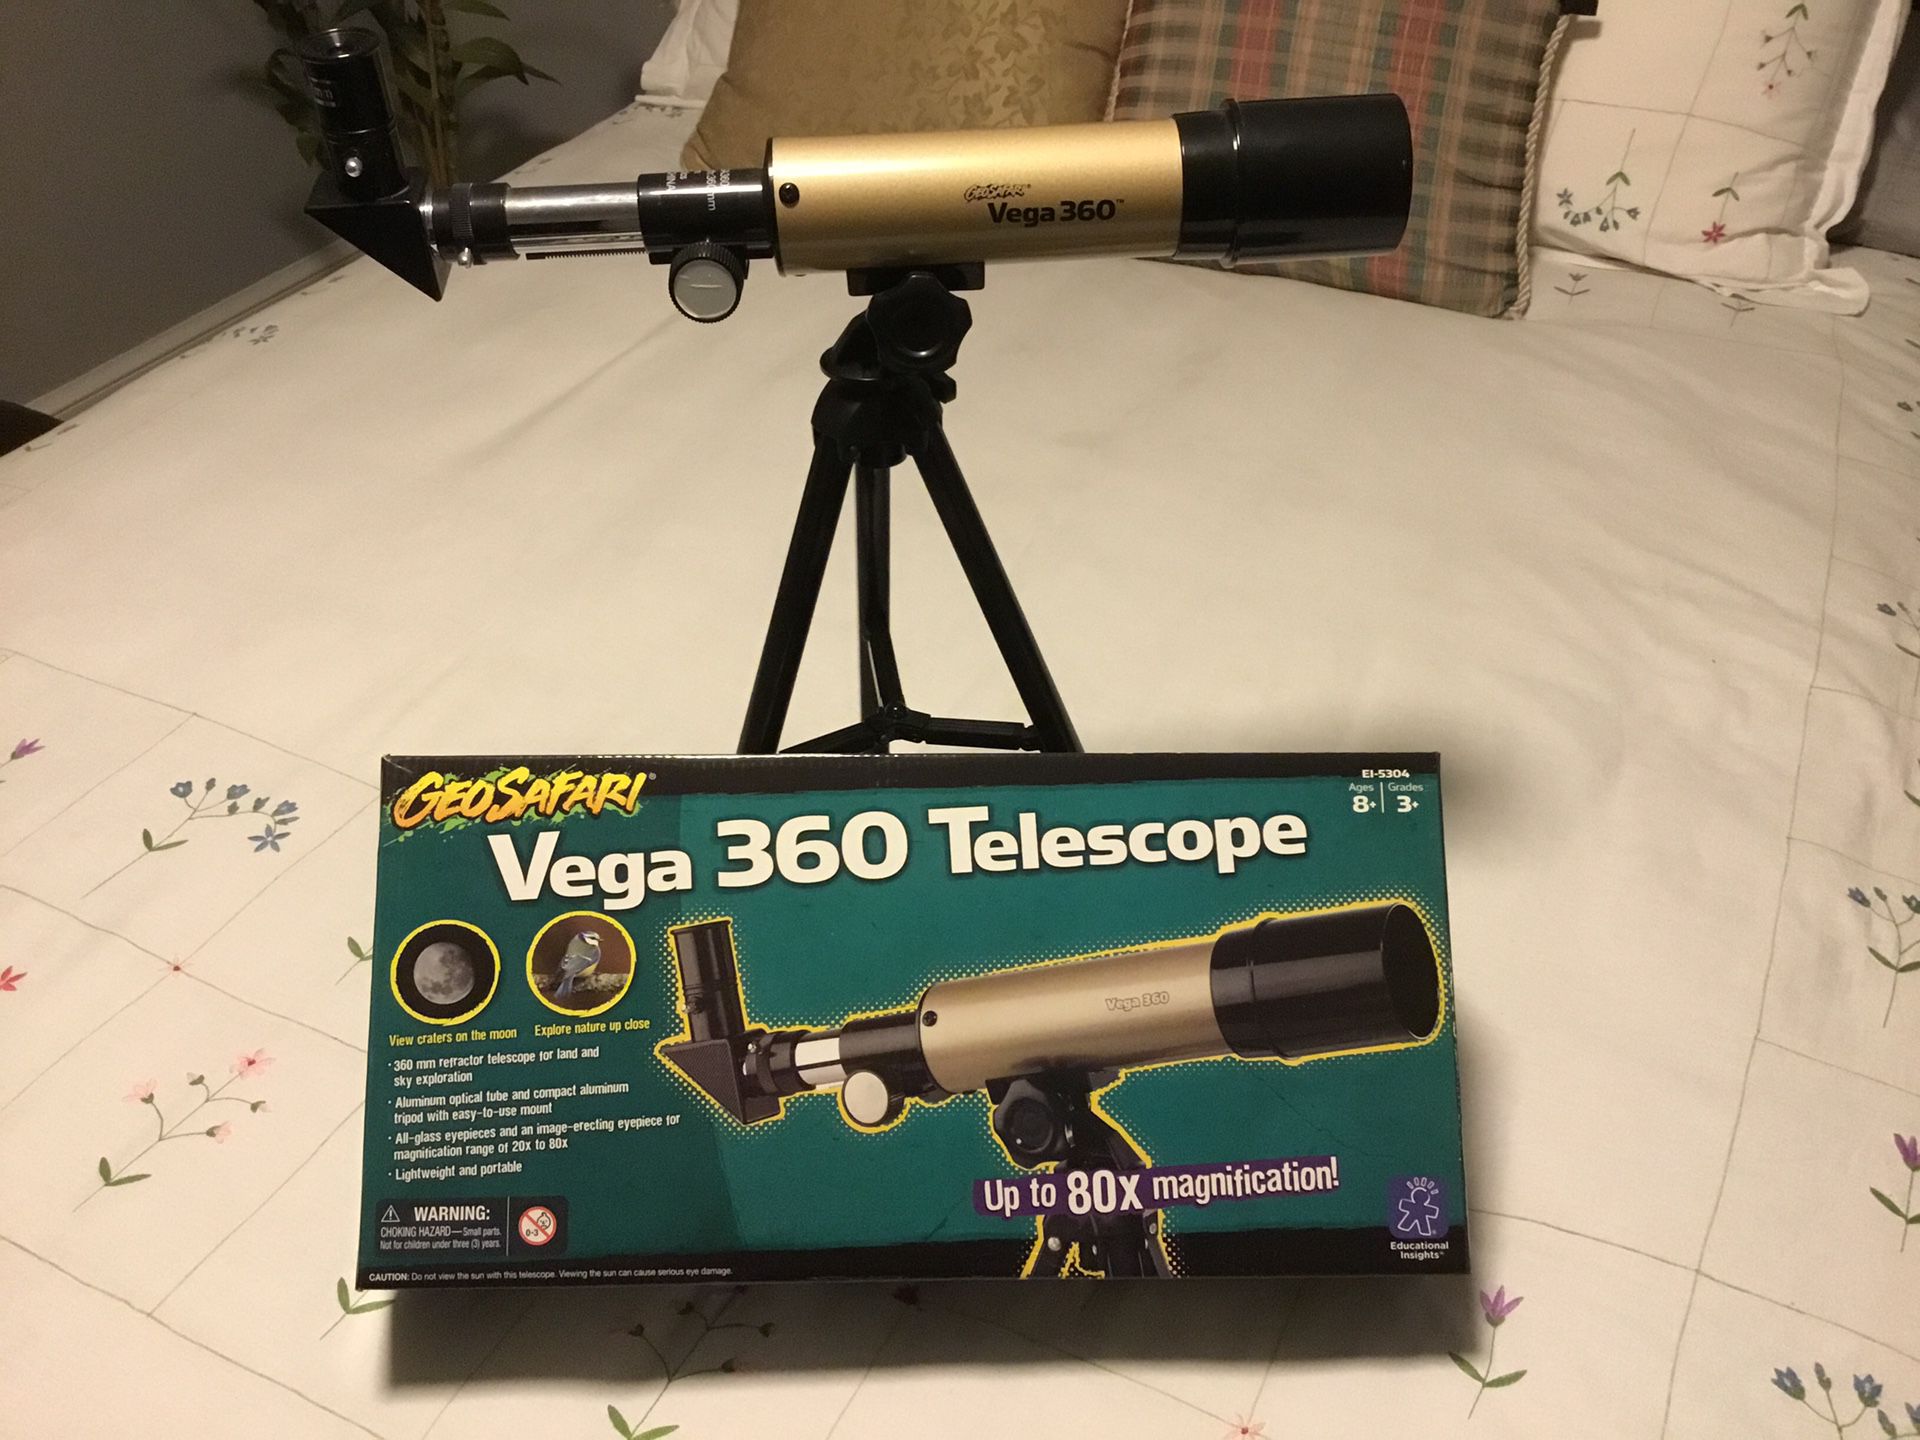 Children’s Telescope, comes with 2 interchangeable glass eyepieces and image extending eyepiece